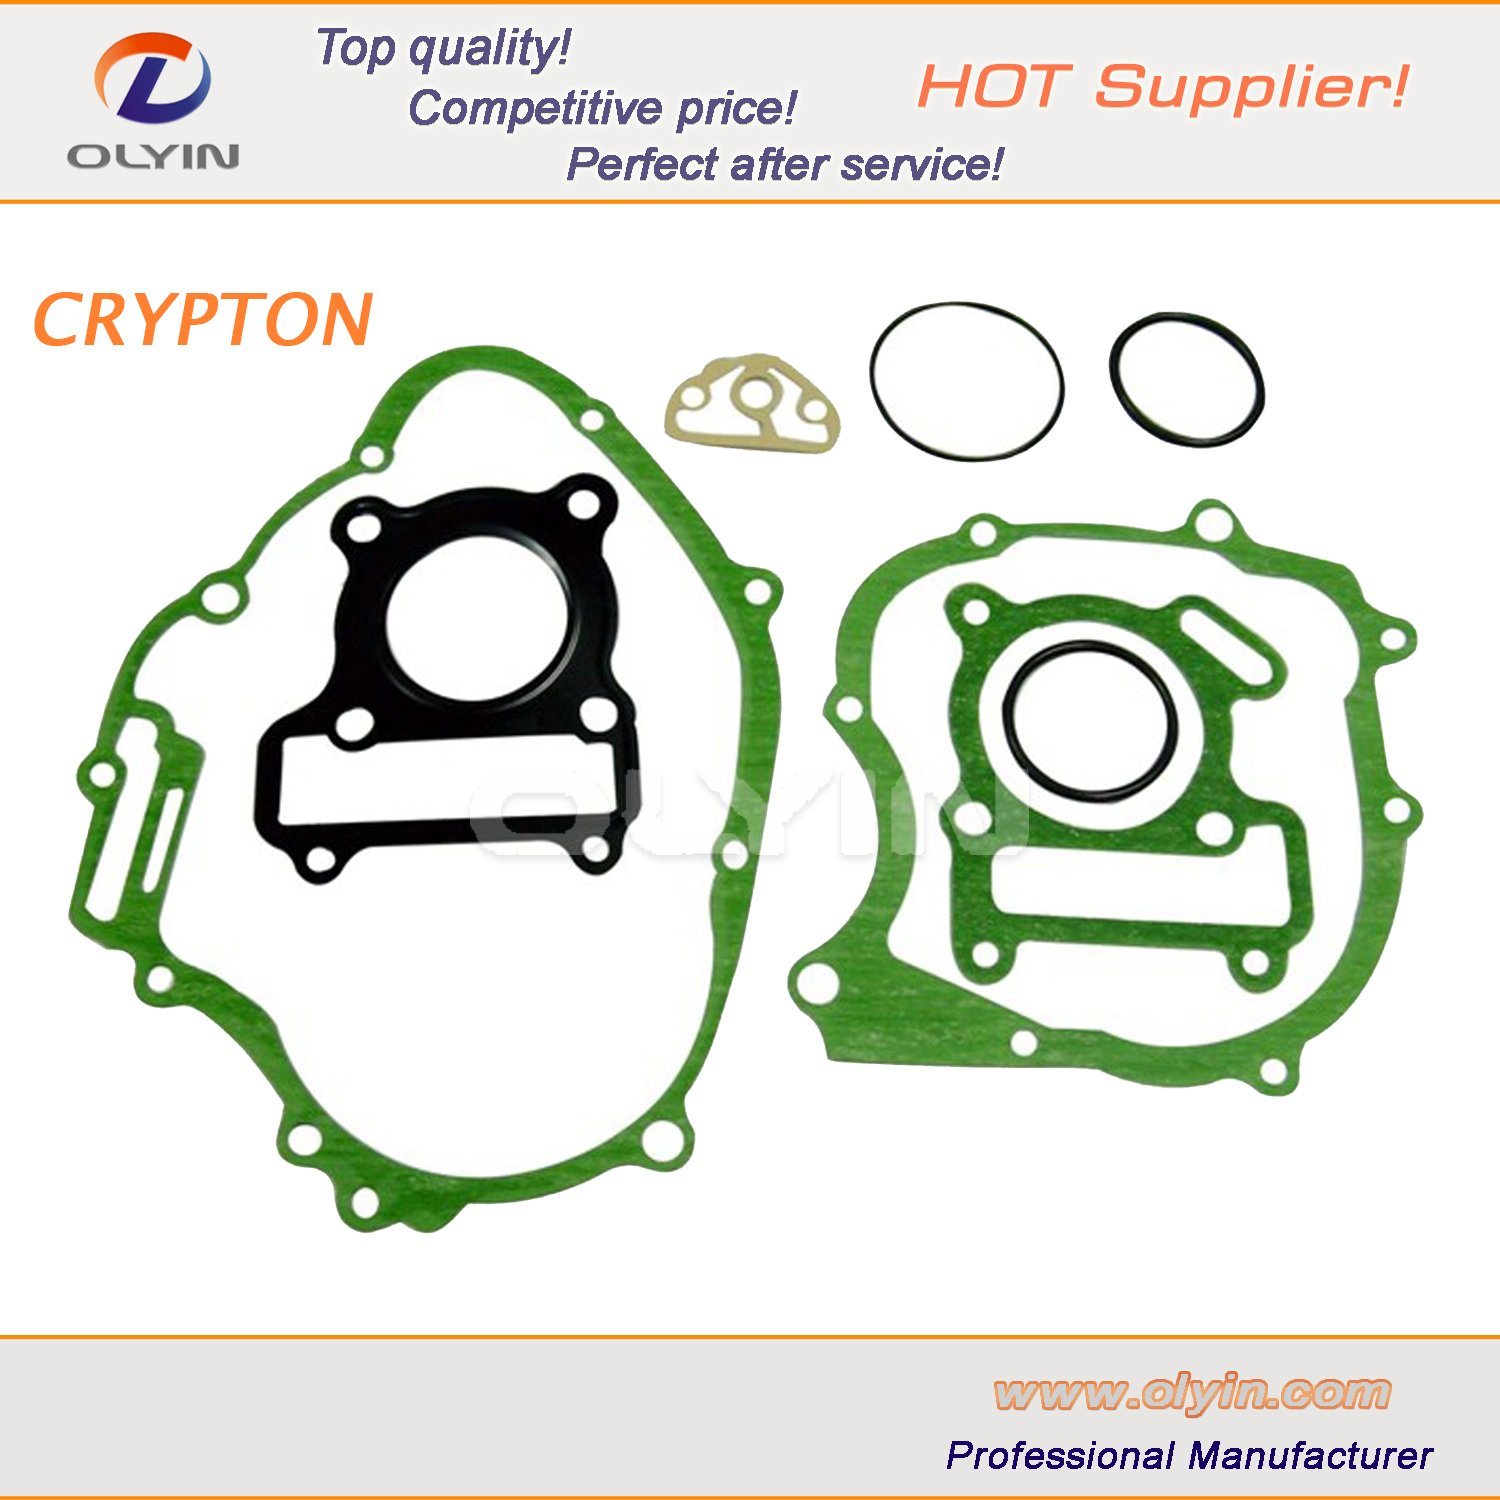 Motorcycle Engine Parts Motorcycle Gasket Kit for Crypton